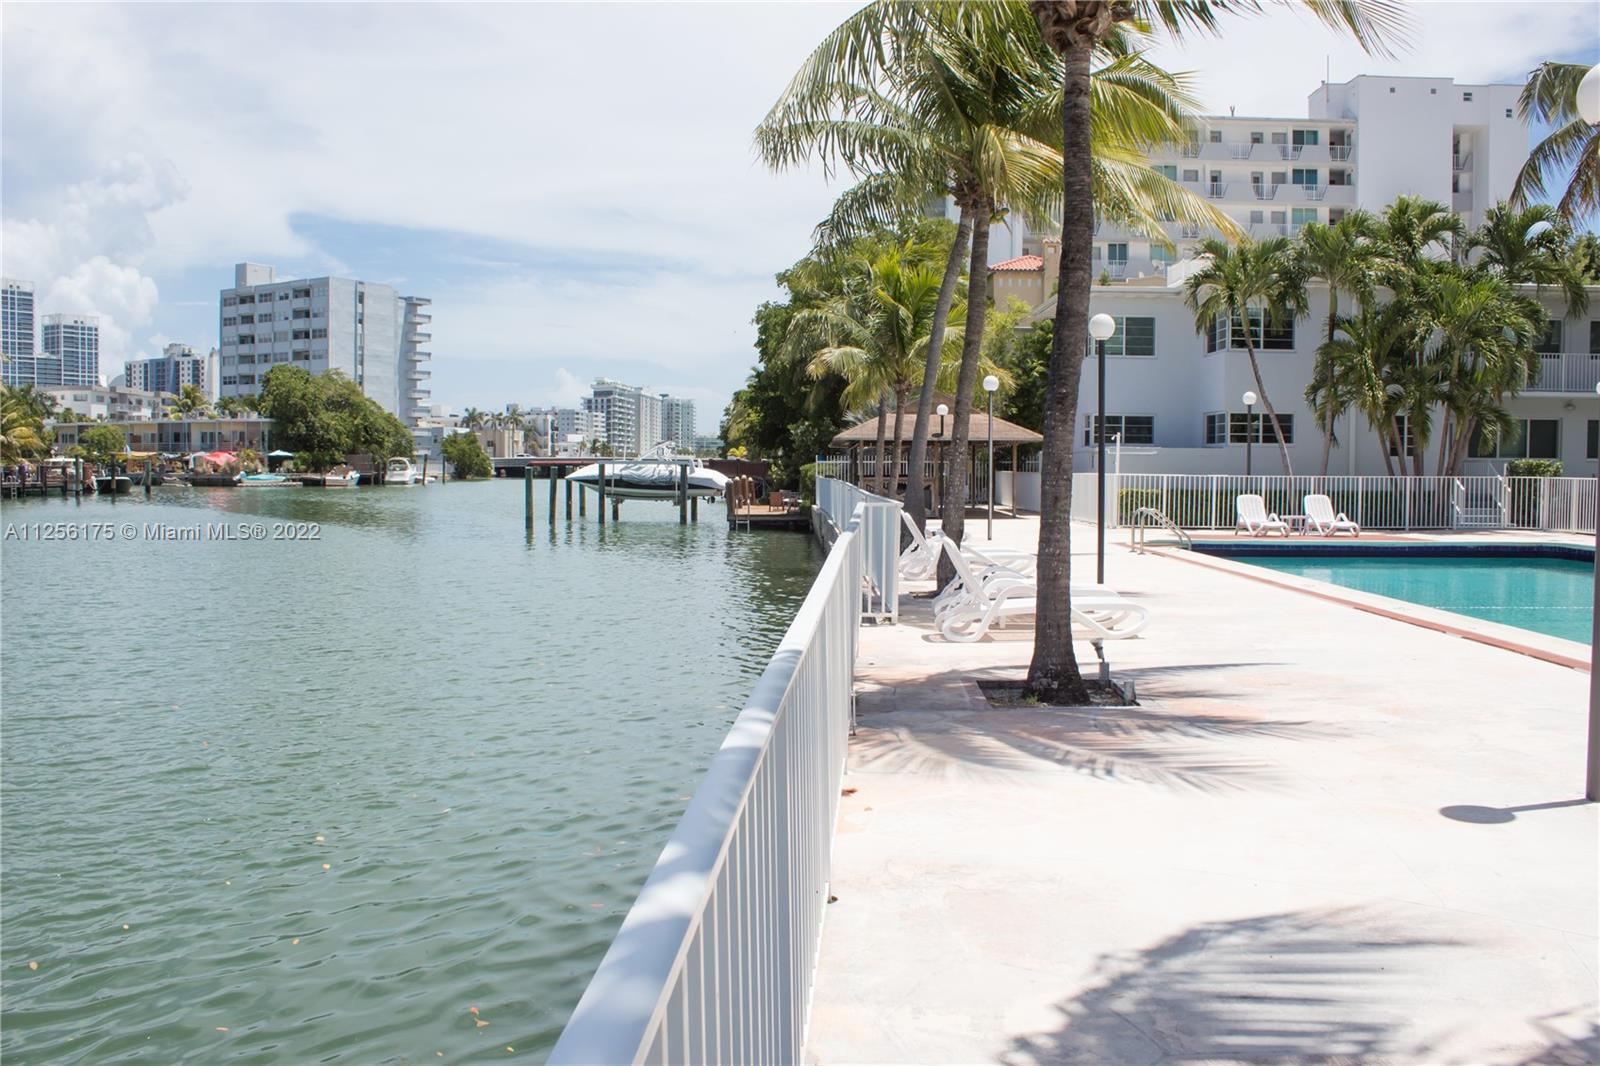 7207  Bay Dr #17 For Sale A11256175, FL